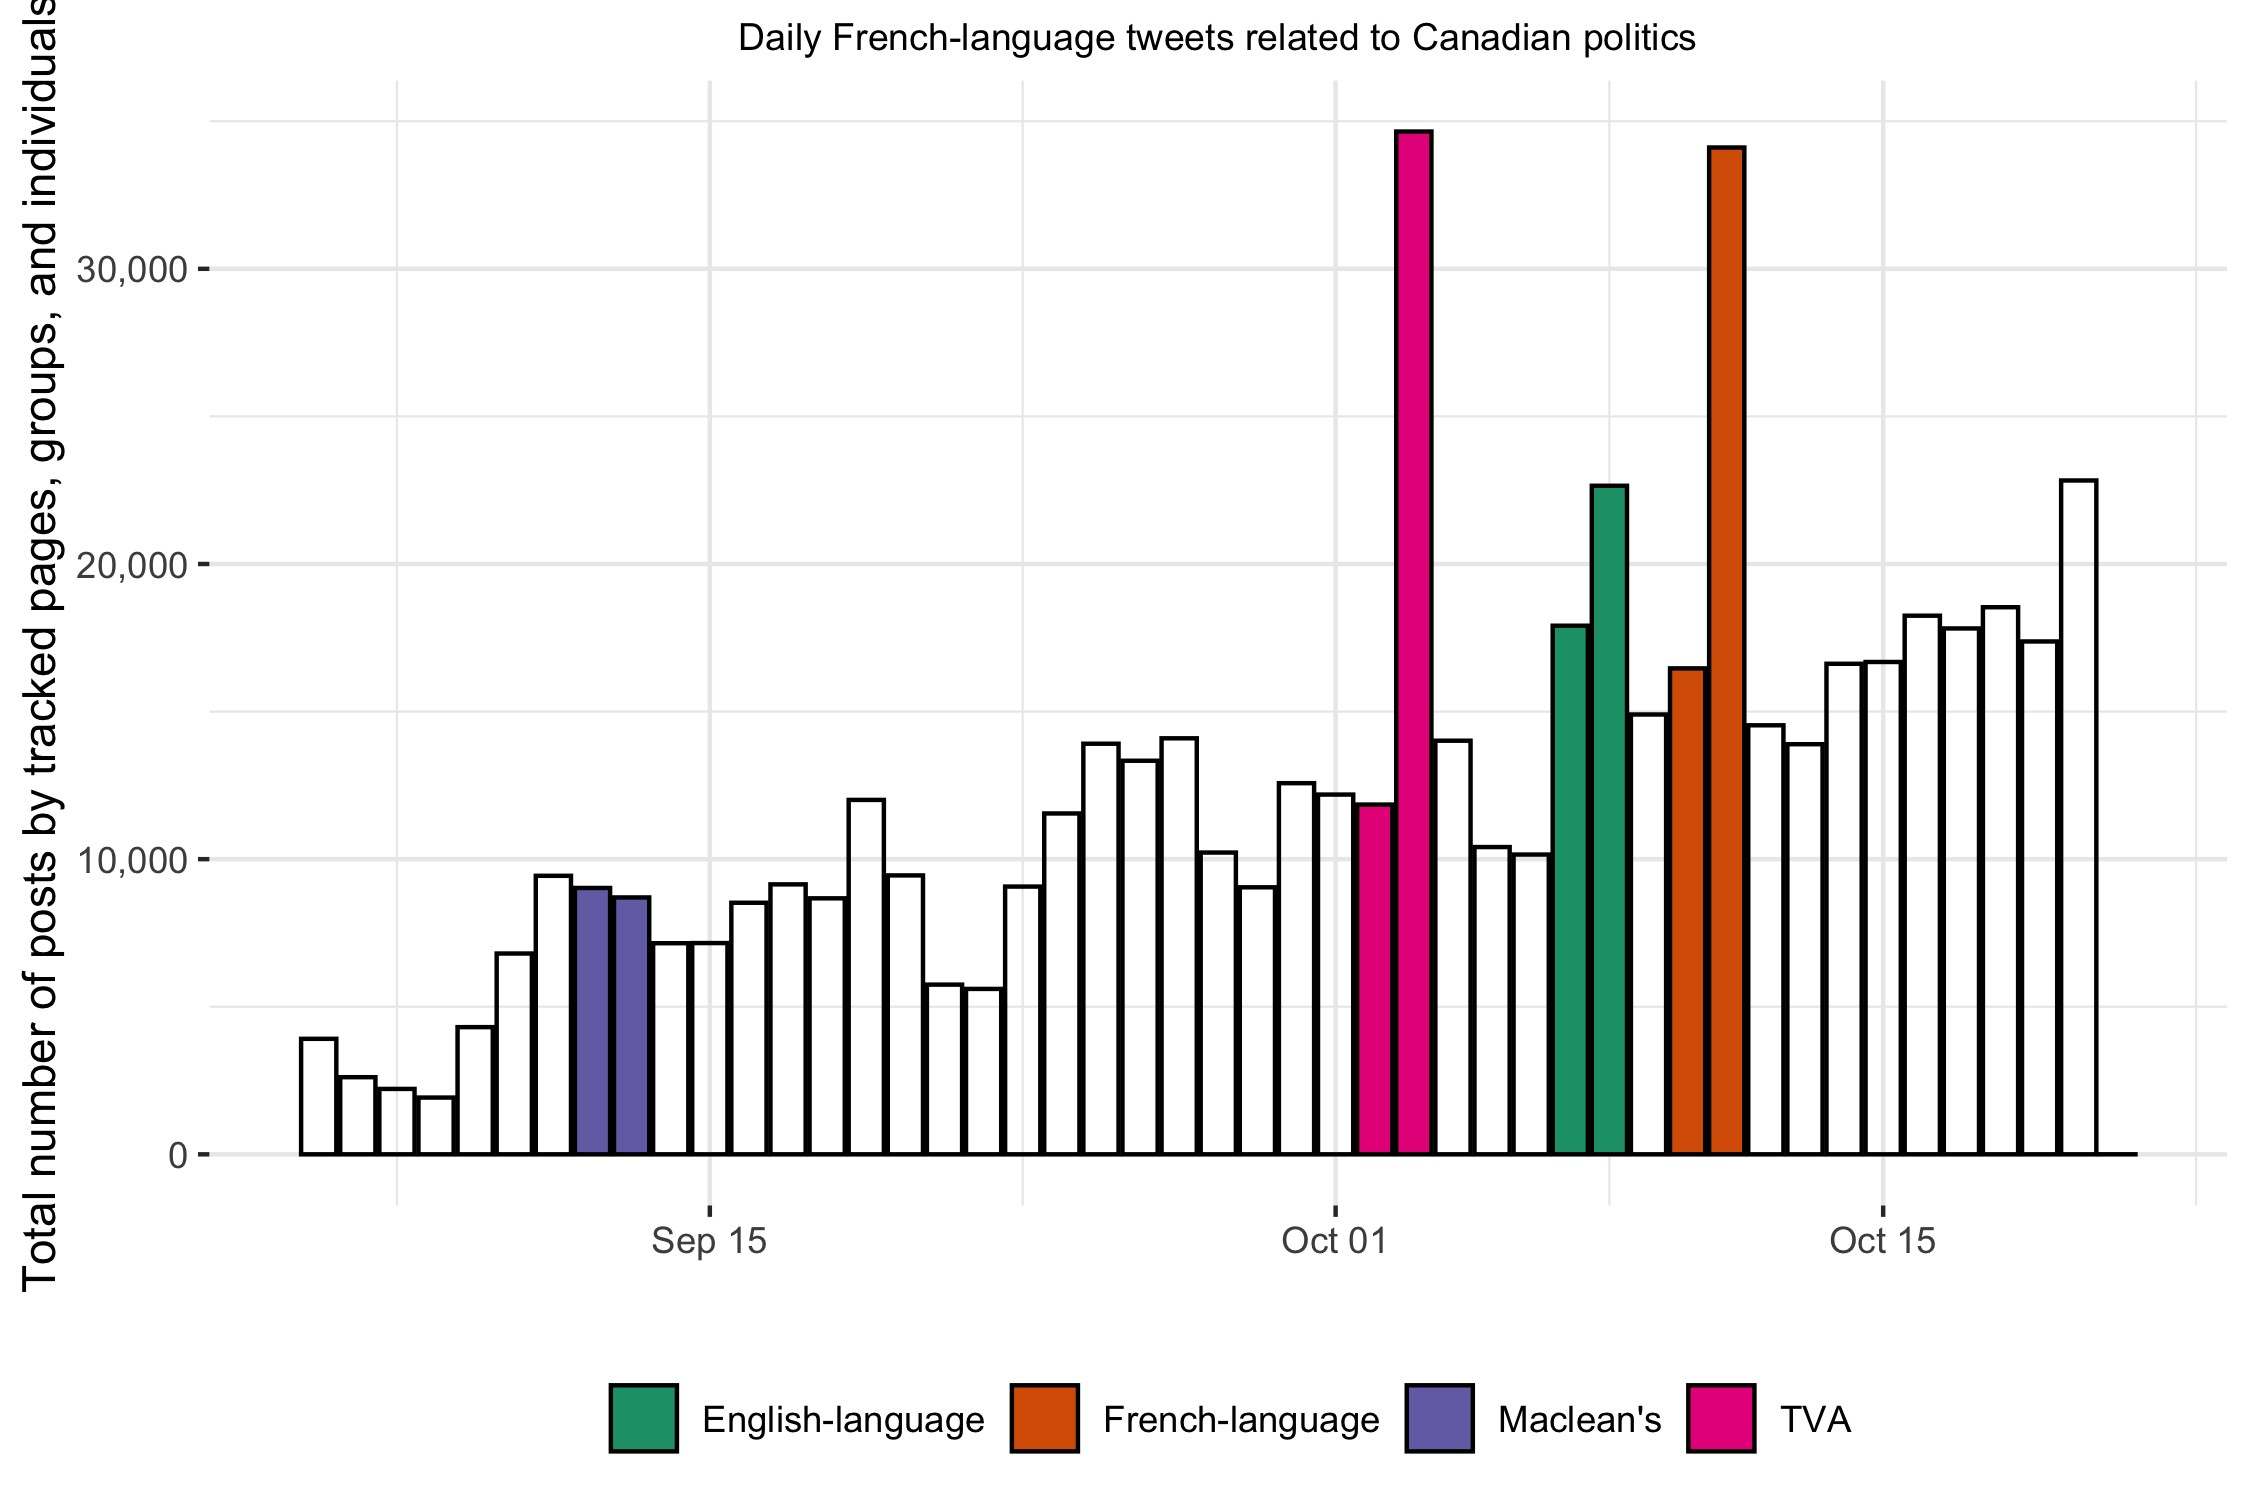 Figure 6: Debate-related Twitter activity during French-language debate